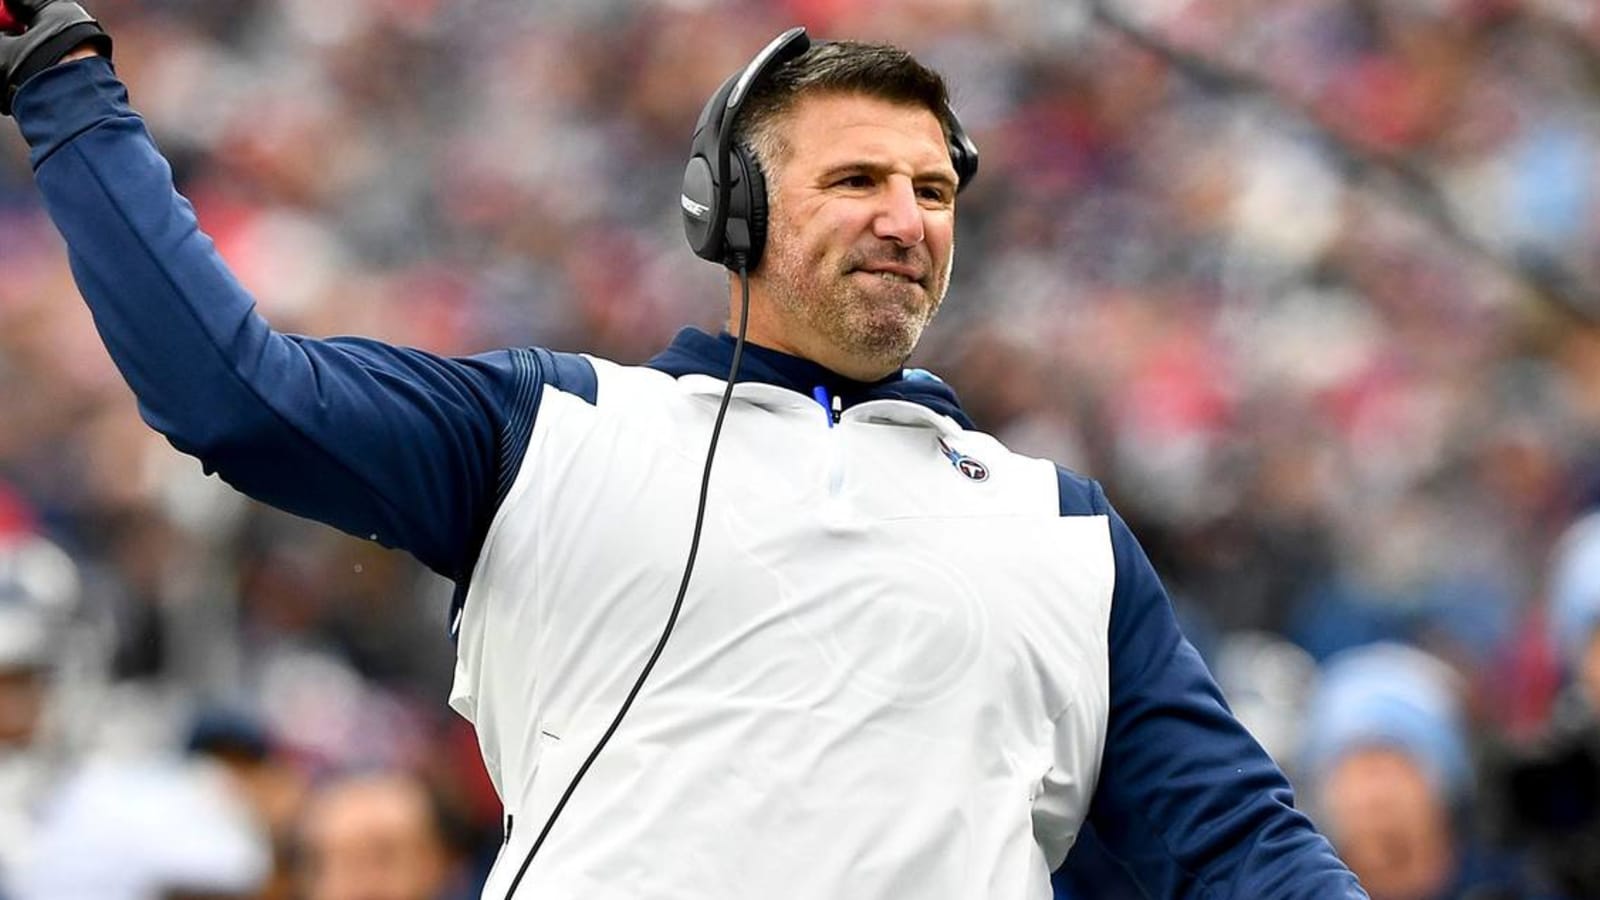 Vrabel walks out on press conference over 'ridiculous' questions